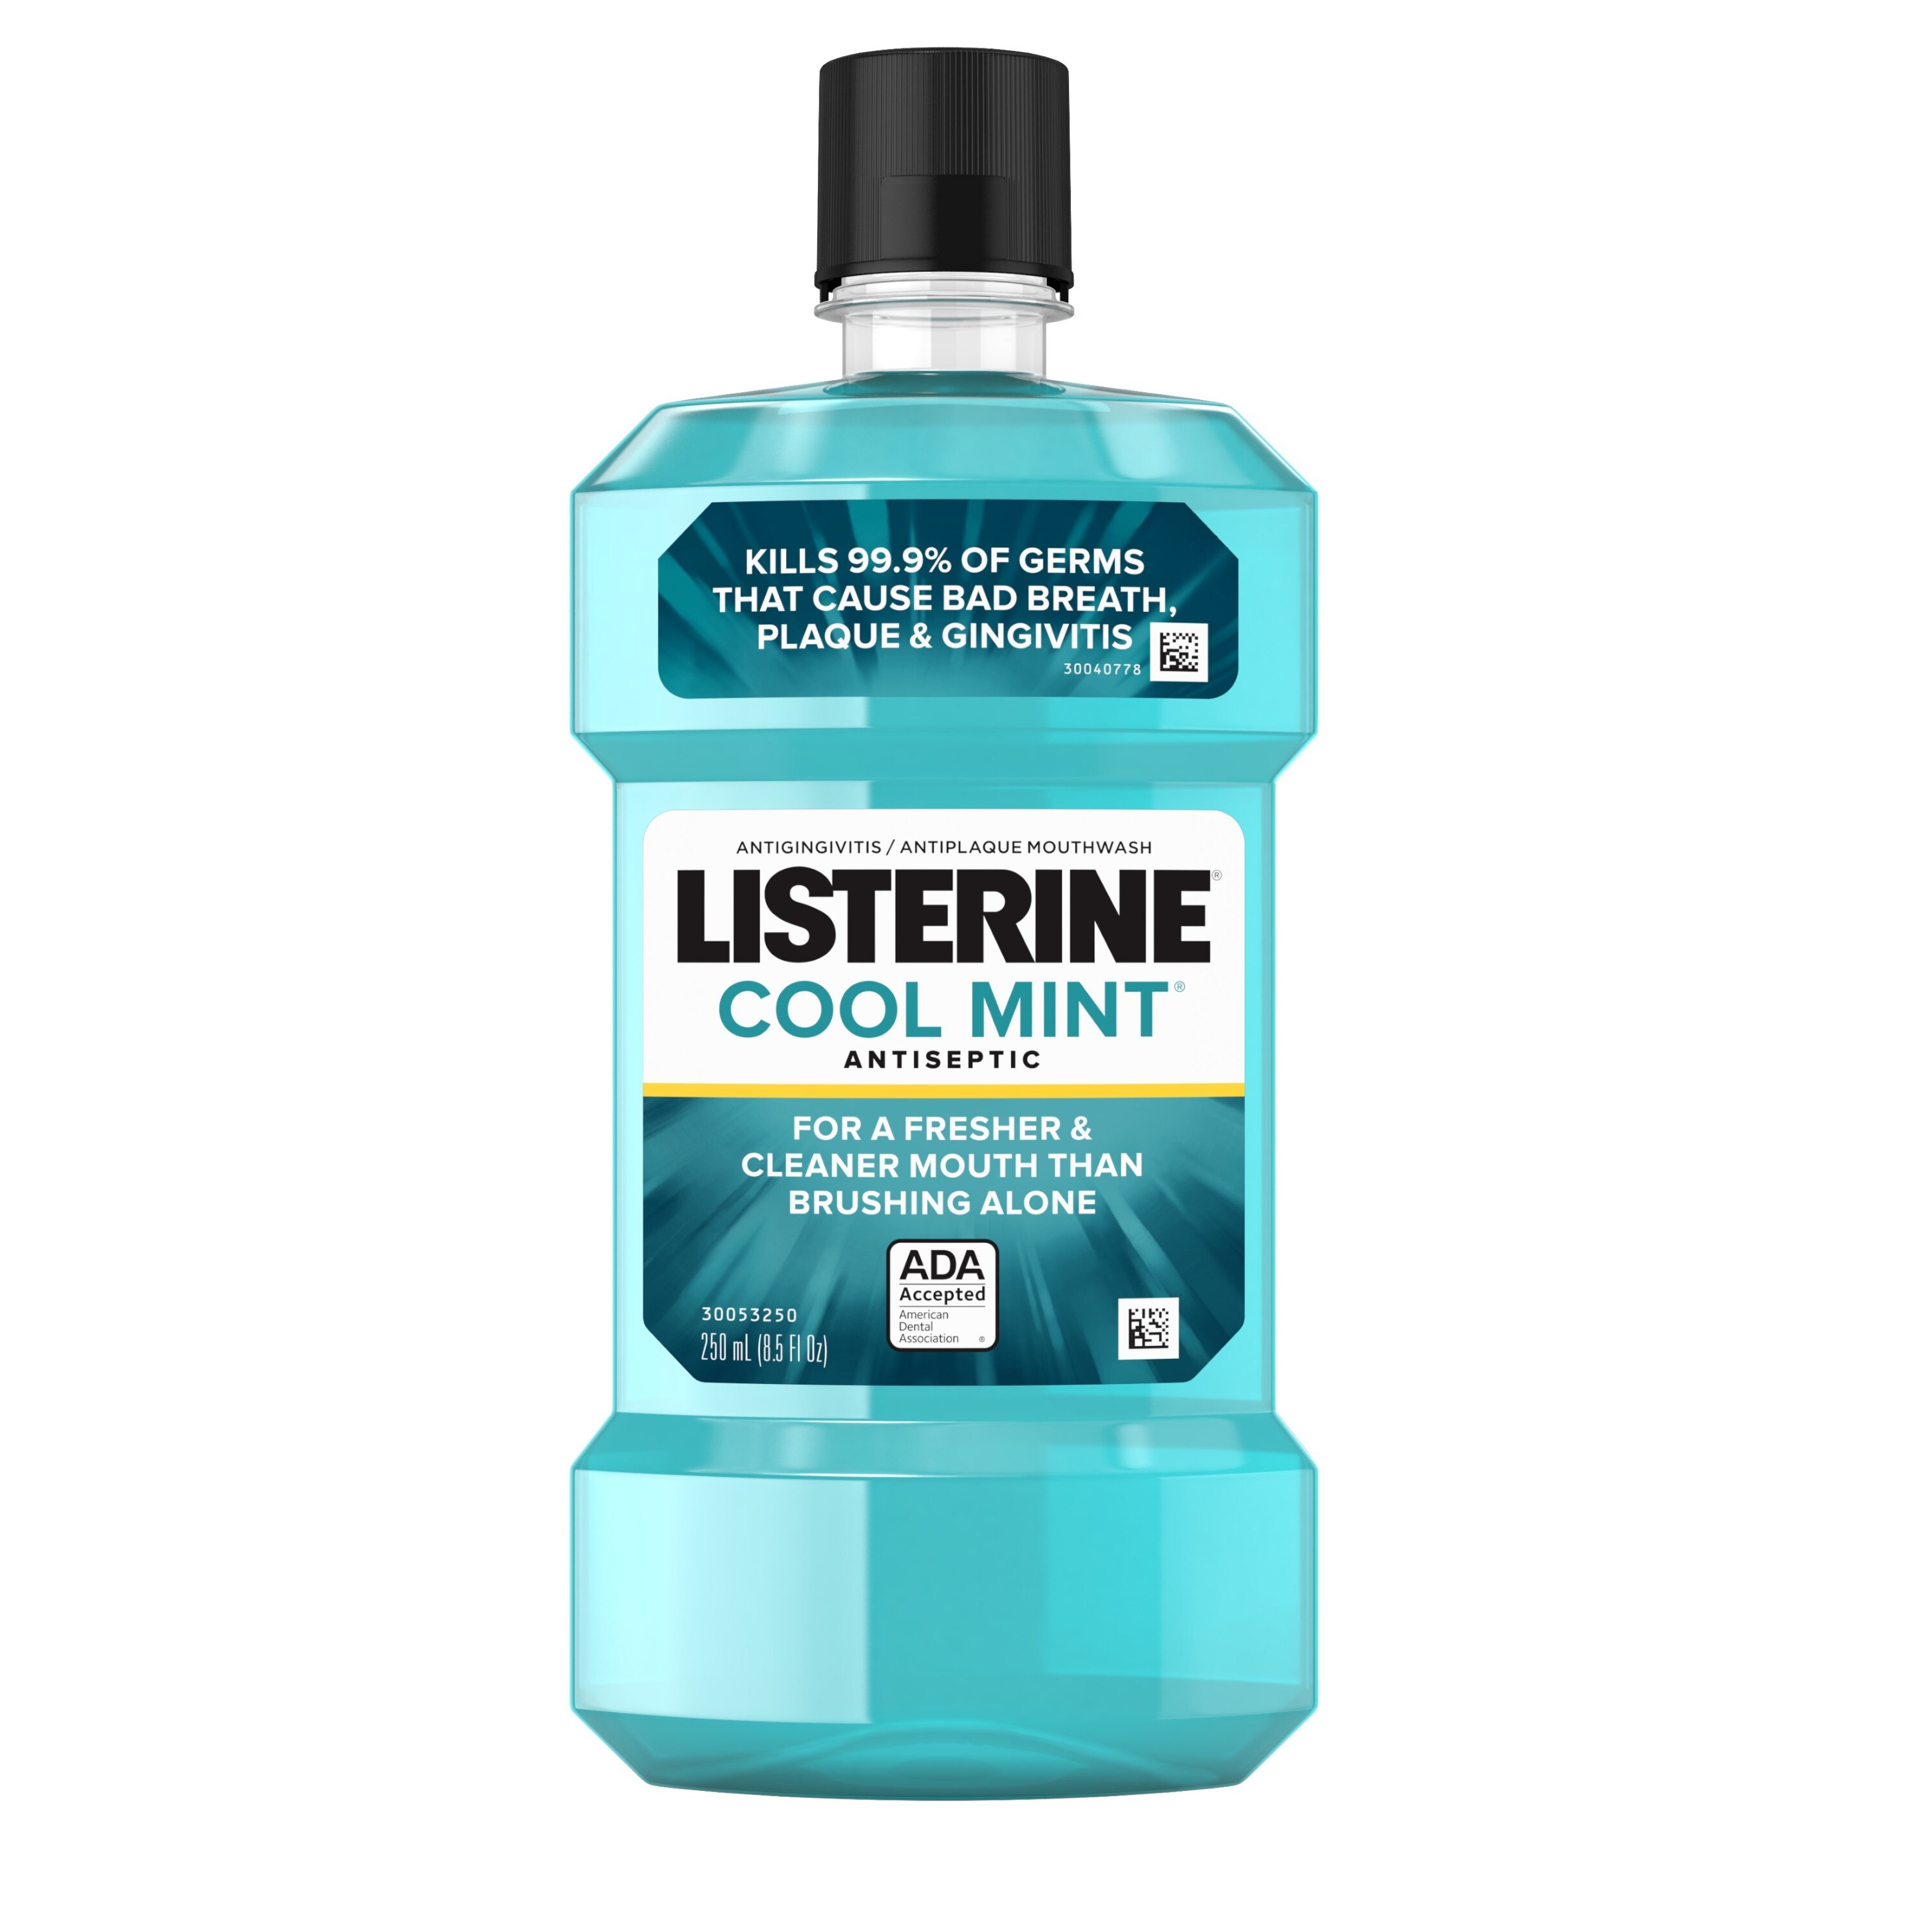 Listerine Cool Mint Antiseptic Mouthwash for Bad Breath & Plaque